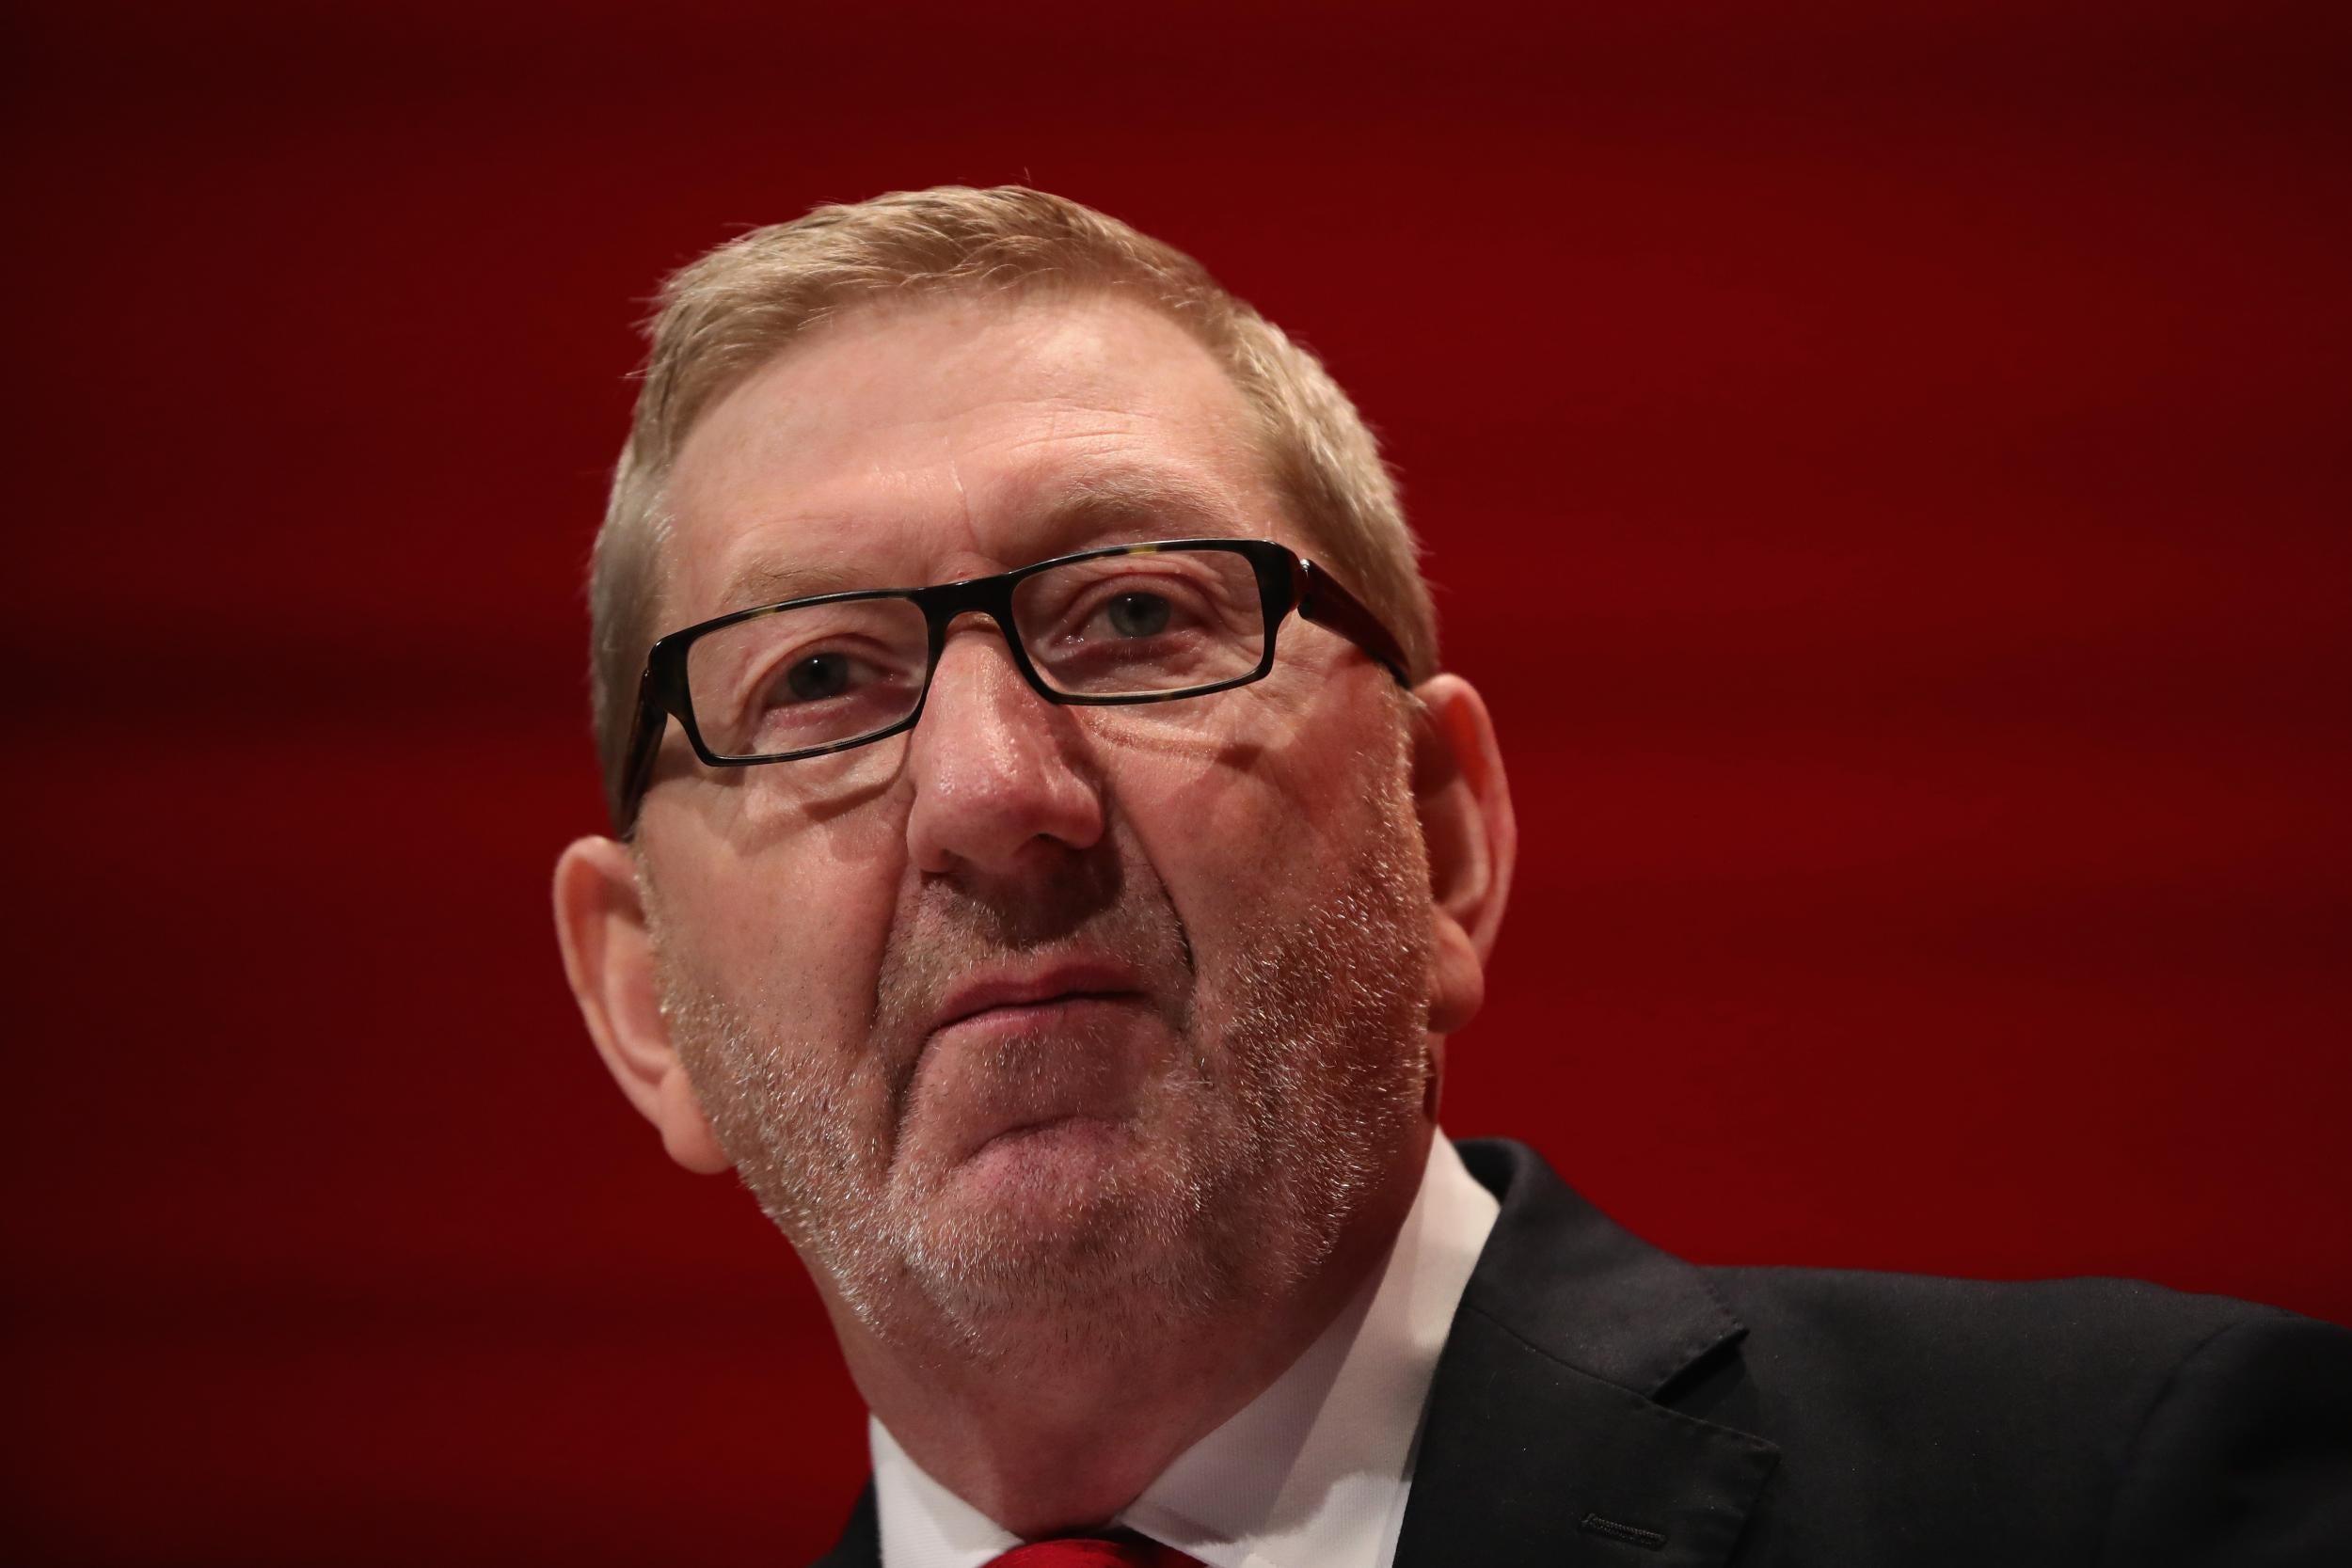 Len McCluskey addresses delegates at the 2016 Labour party conference in Liverpool